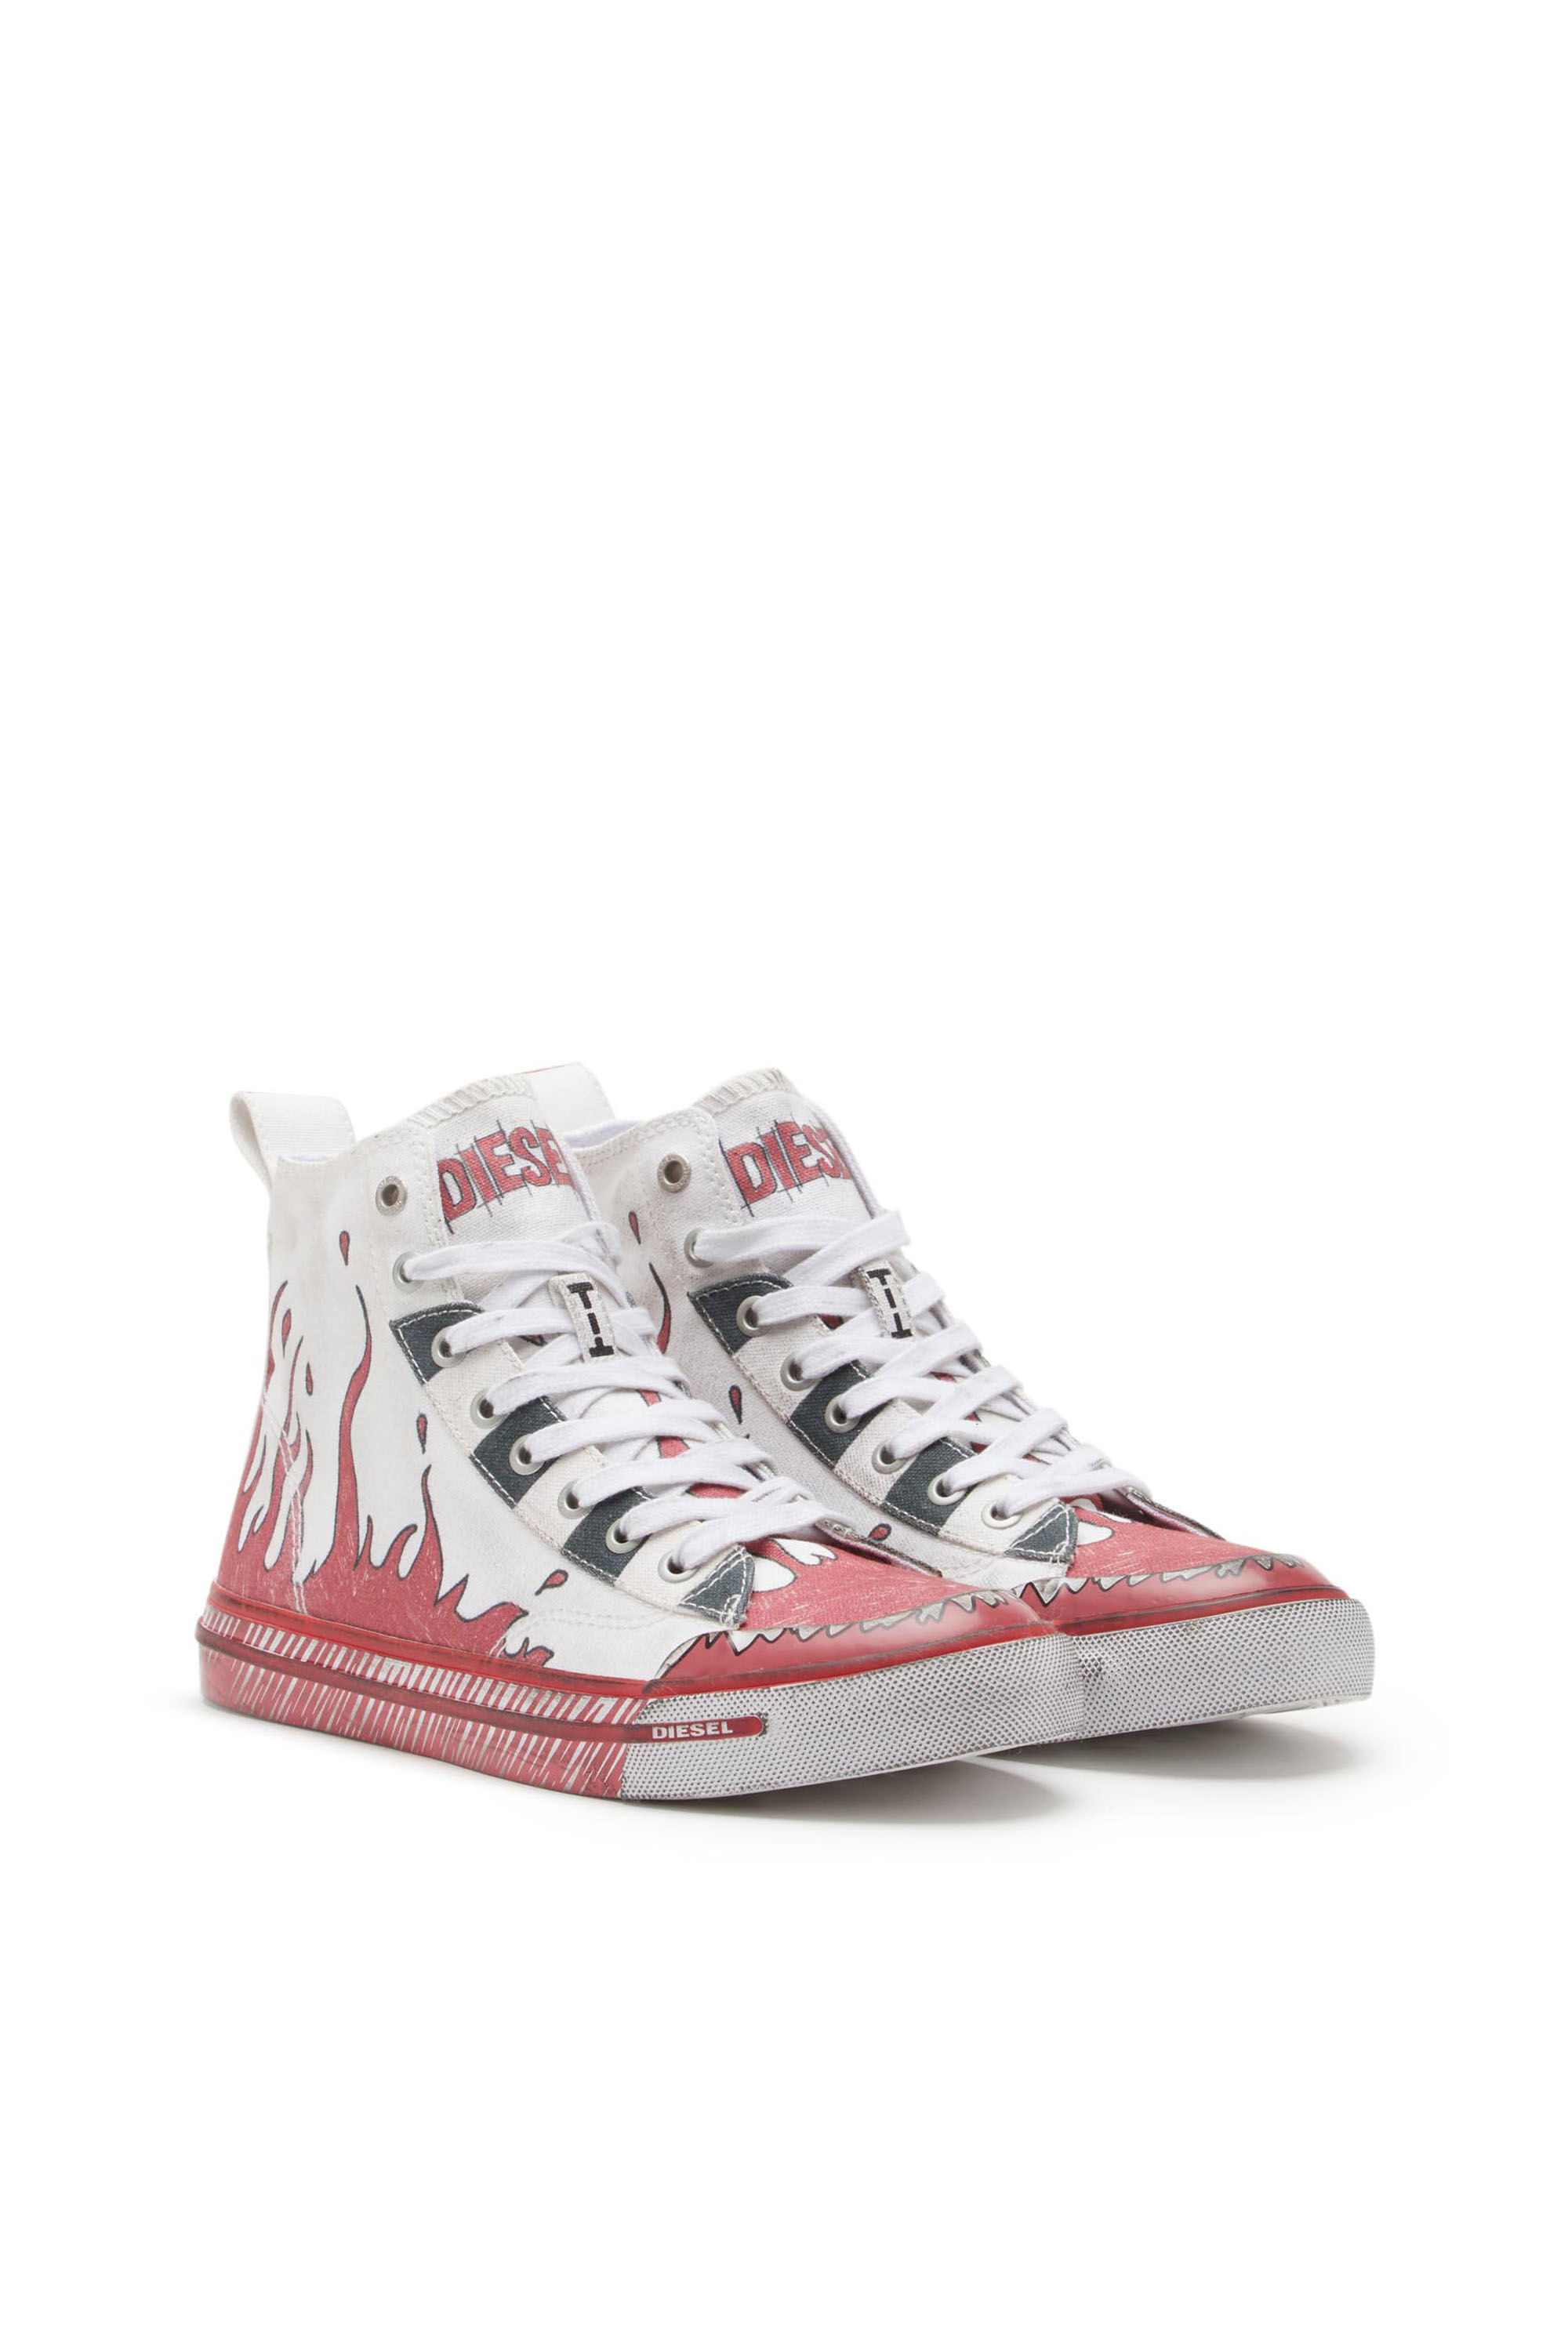 S-ATHOS MID W Woman: High-top sneakers with flame print | Diesel